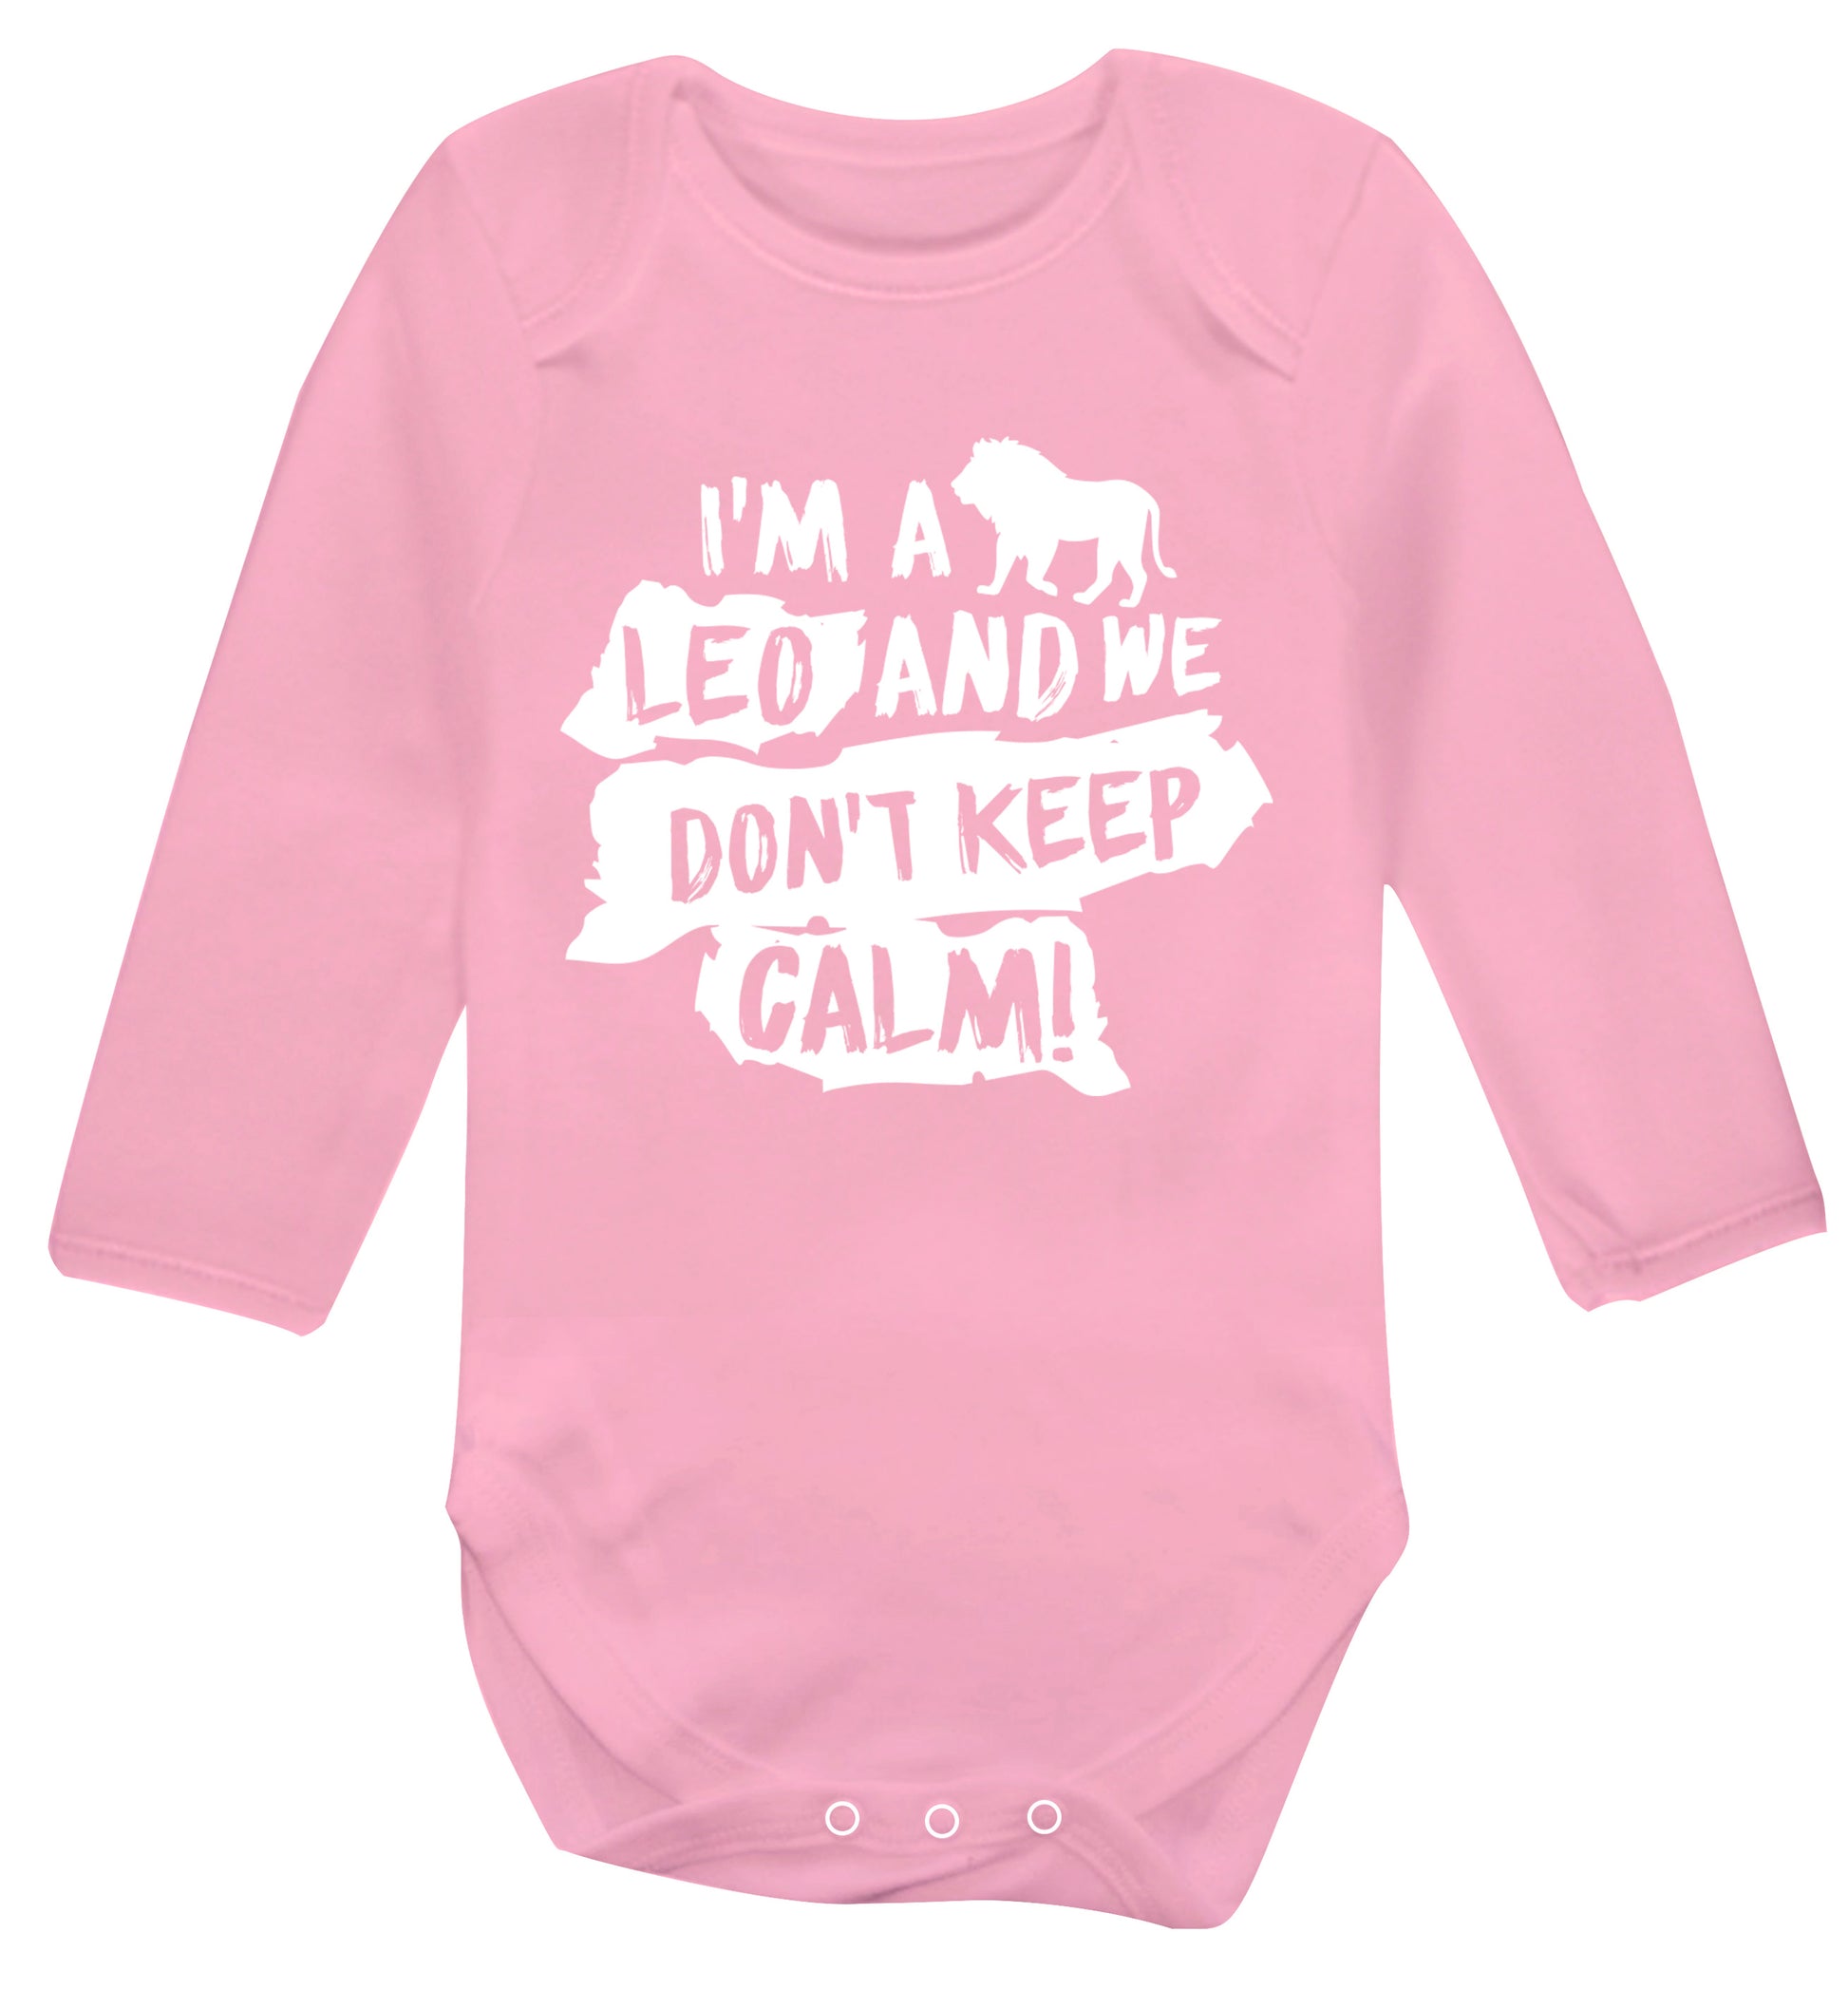 I'm a leo and we don't keep calm! Baby Vest long sleeved pale pink 6-12 months